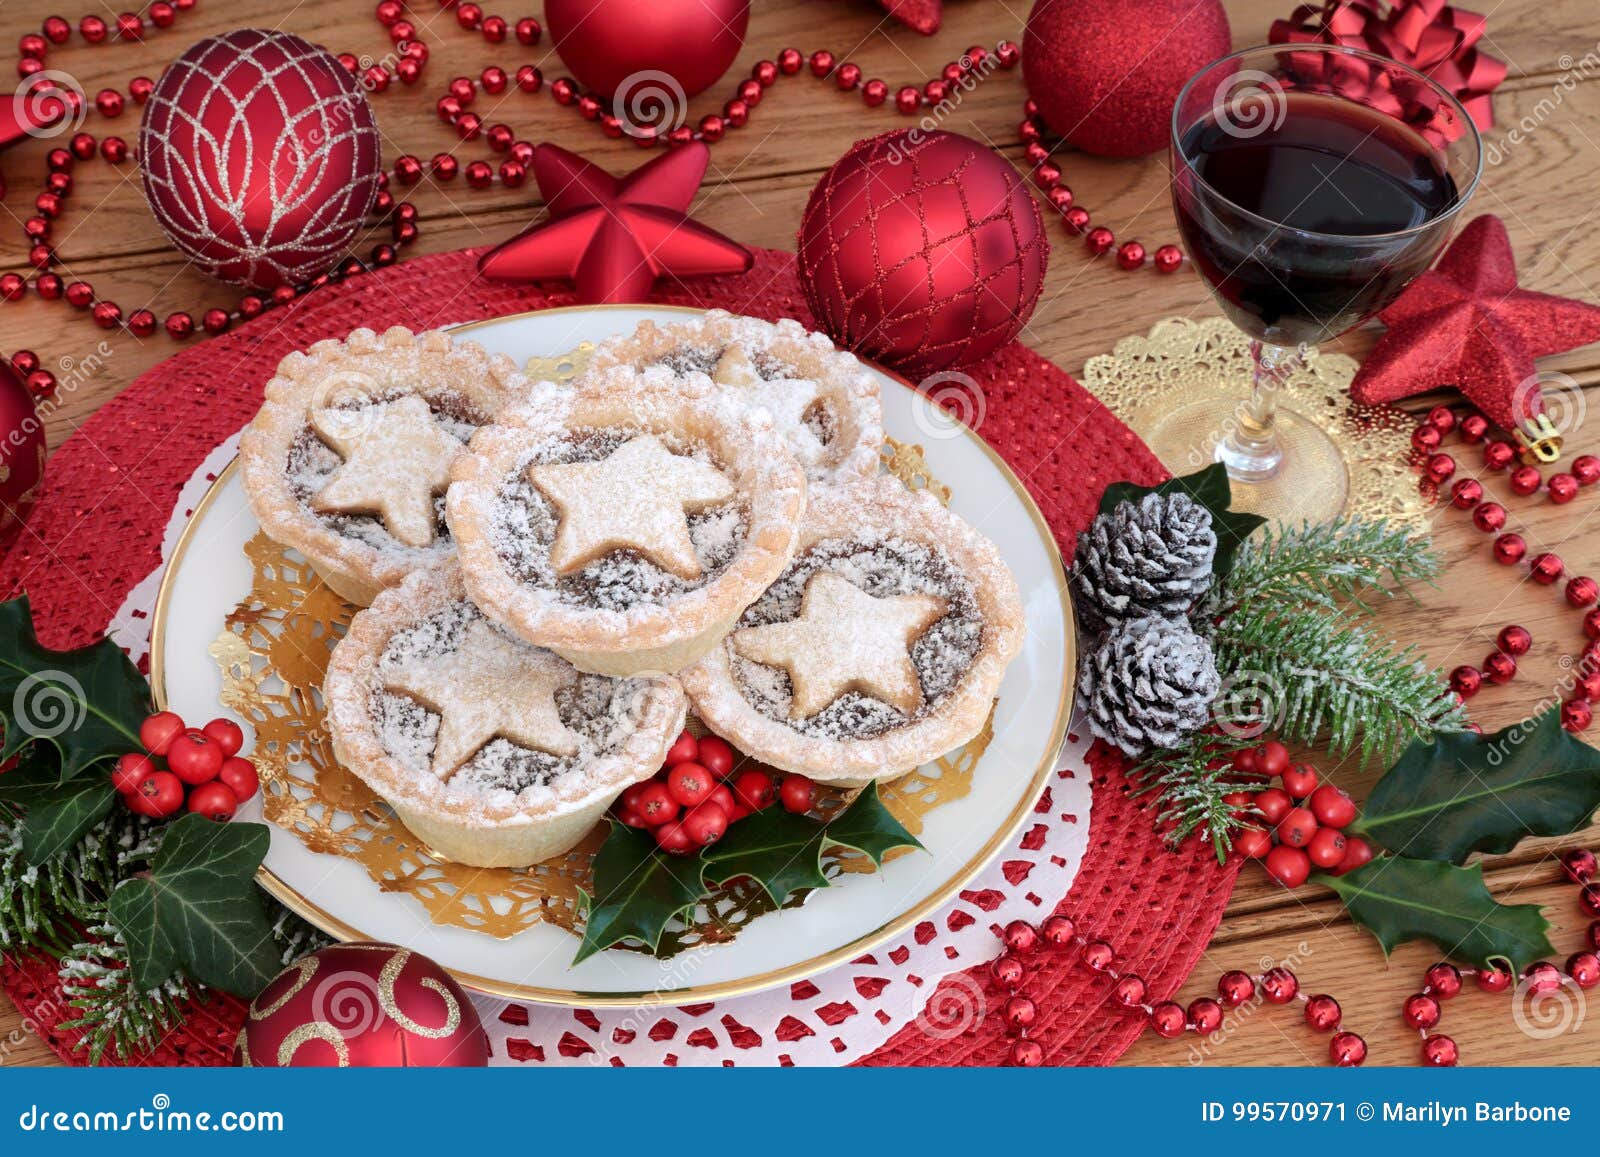 christmas mince pies and wine